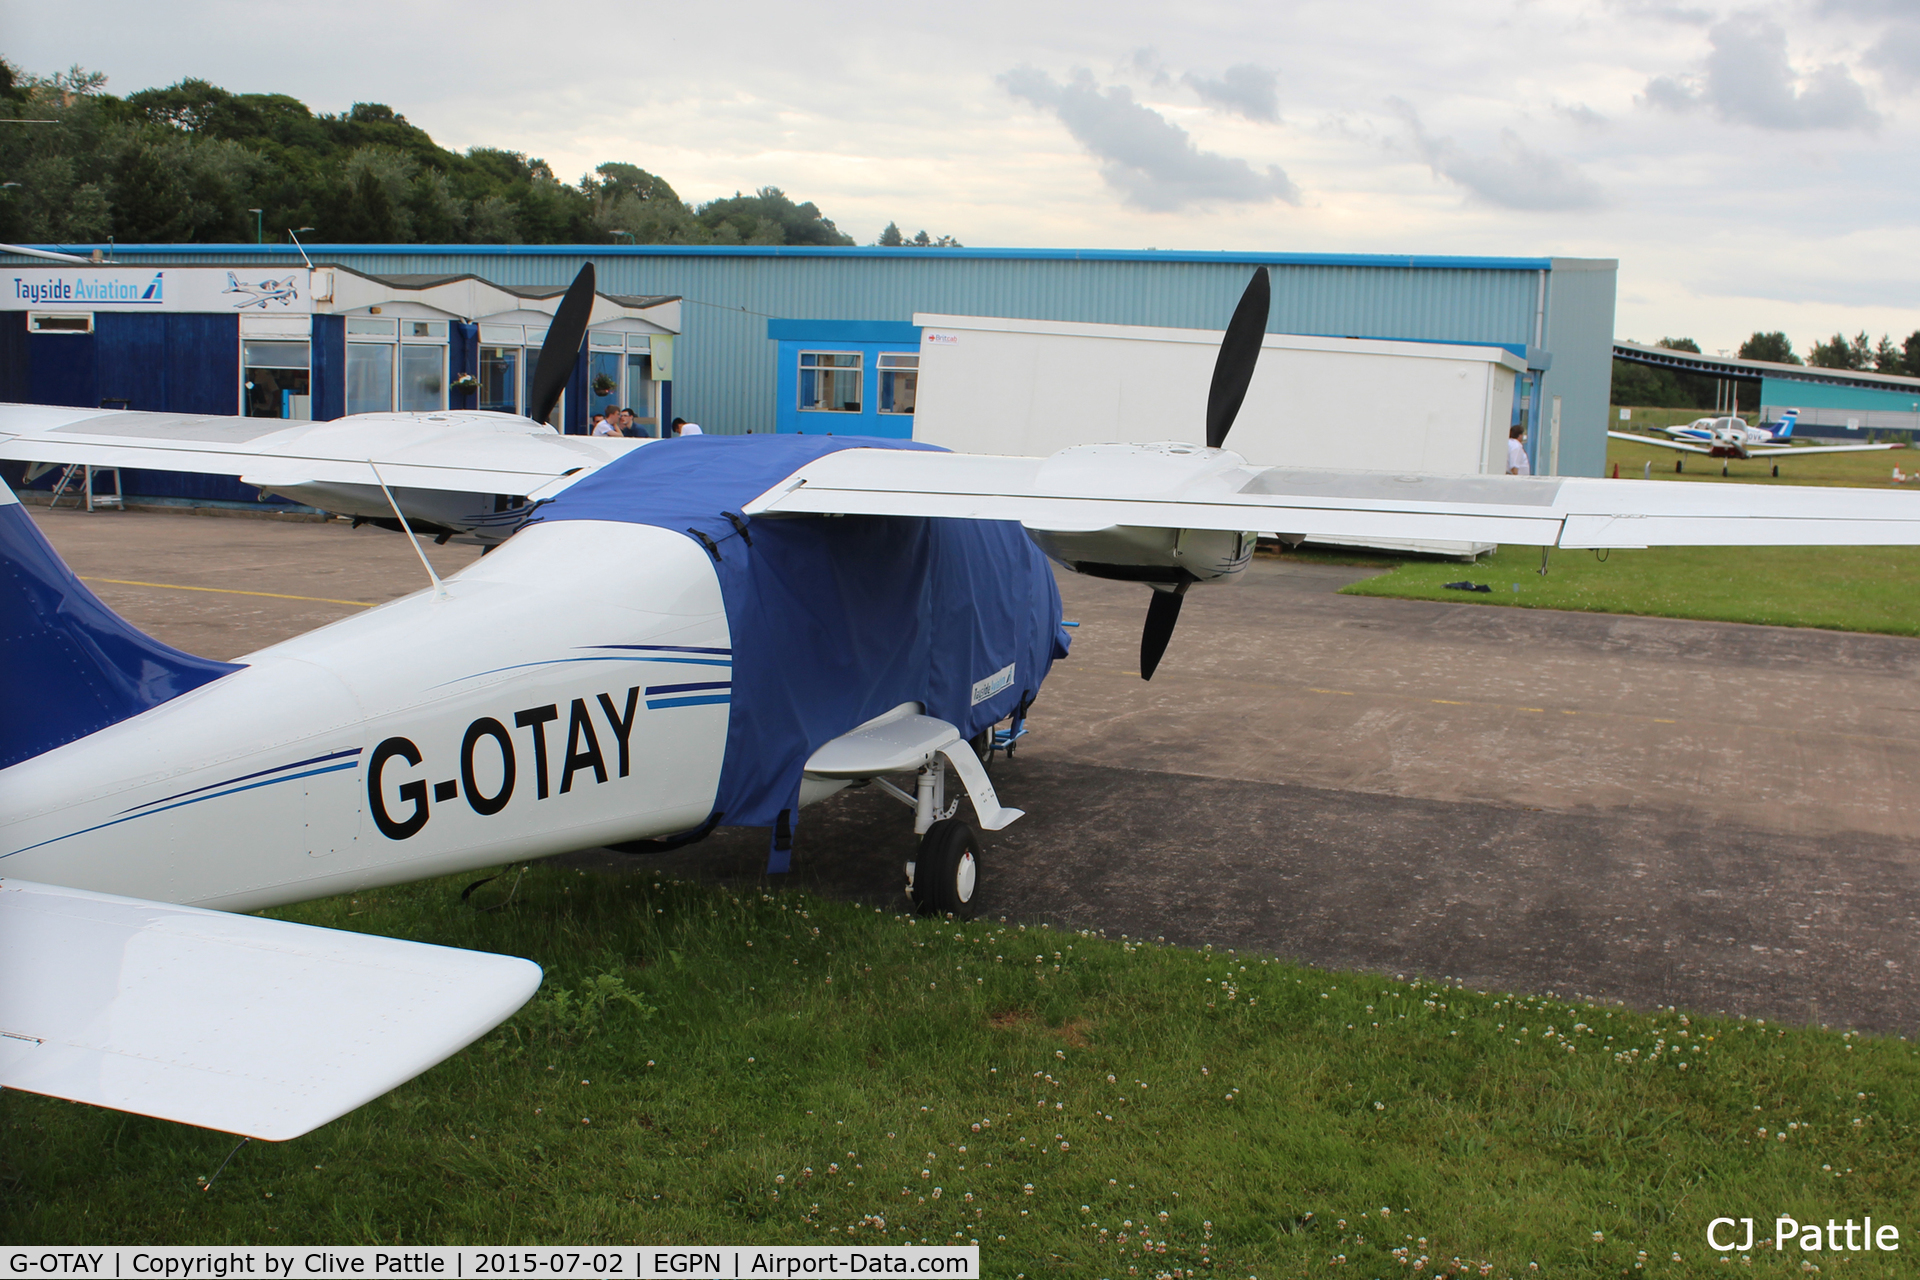 G-OTAY, 2010 Tecnam P-2006T C/N 049, Another oblique view parked up at Dundee Riverside EGPN